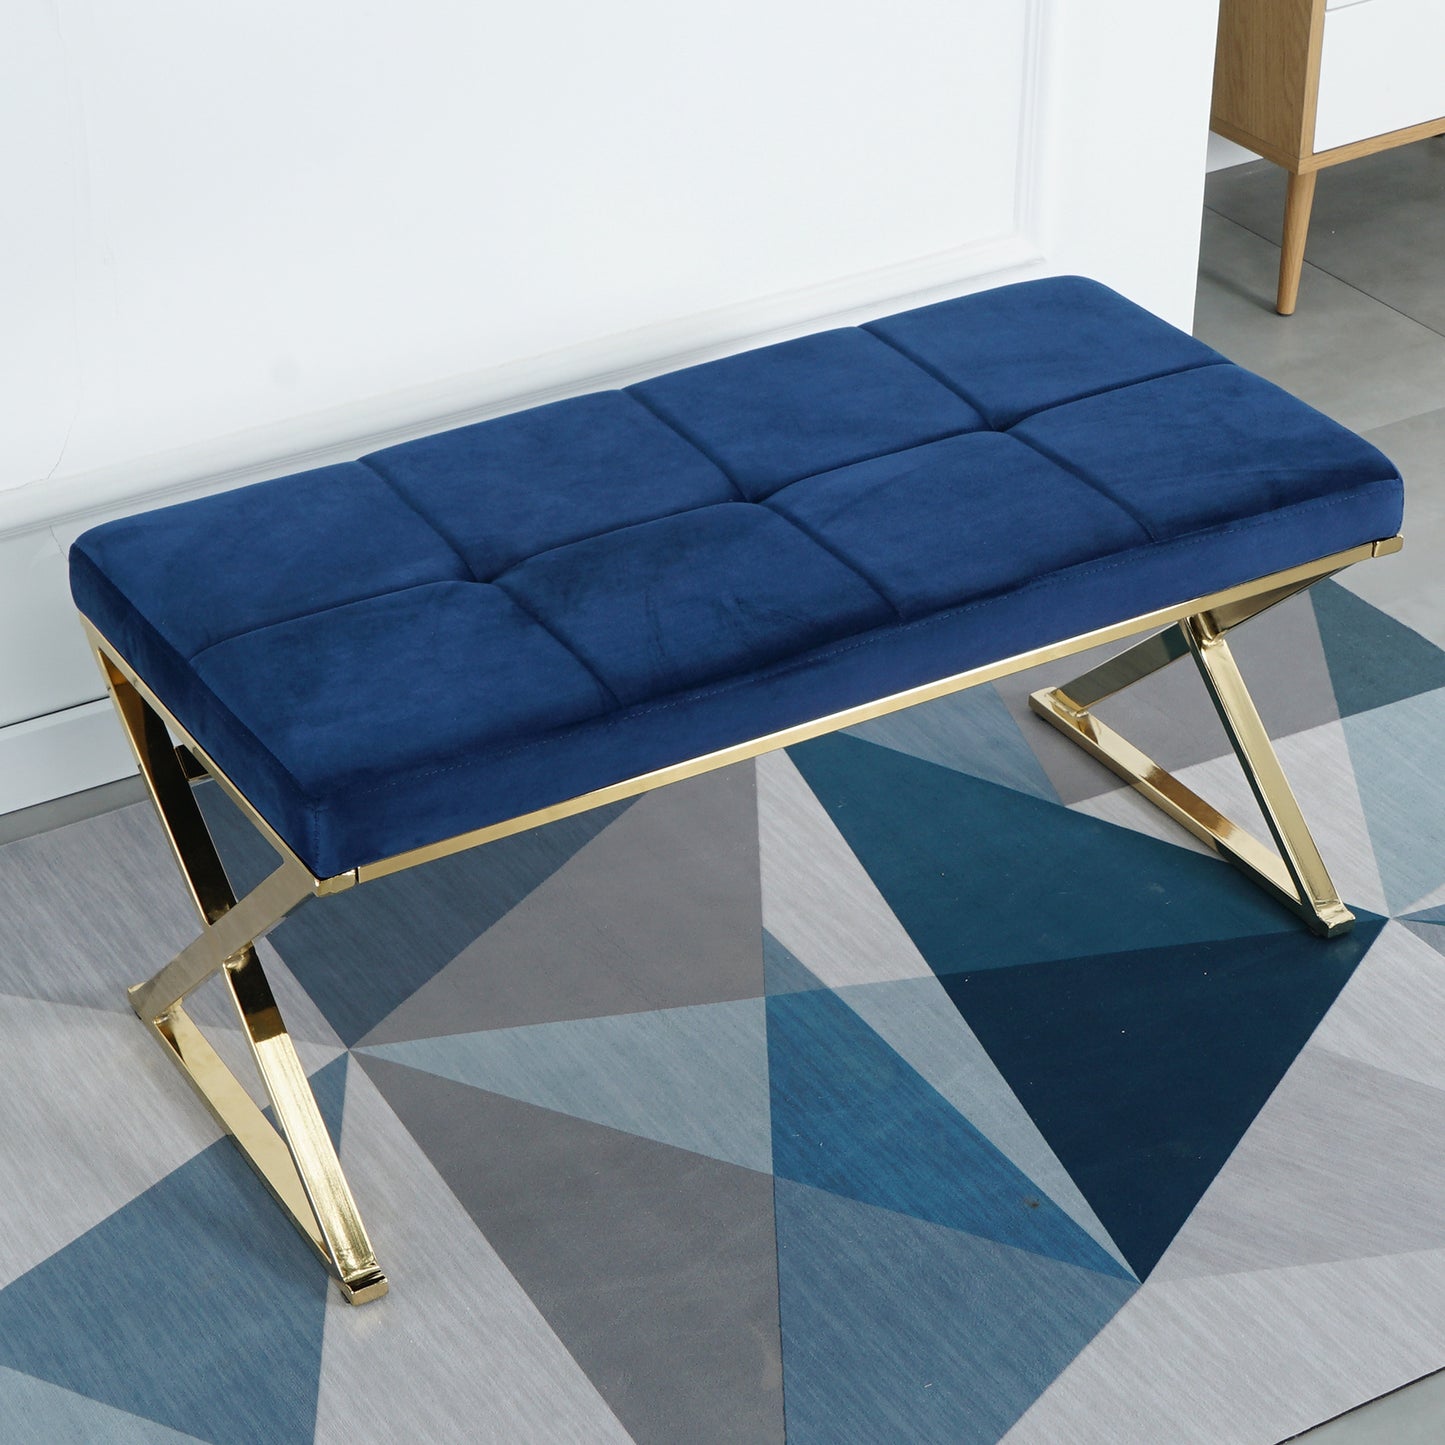 SYNGAR Upholstered Bedroom Bench, Modern Velvet Footstool Bench Seat for Living Room, Hallway, Entryway, Ottoman Bench with Gold Metal Legs, Blue